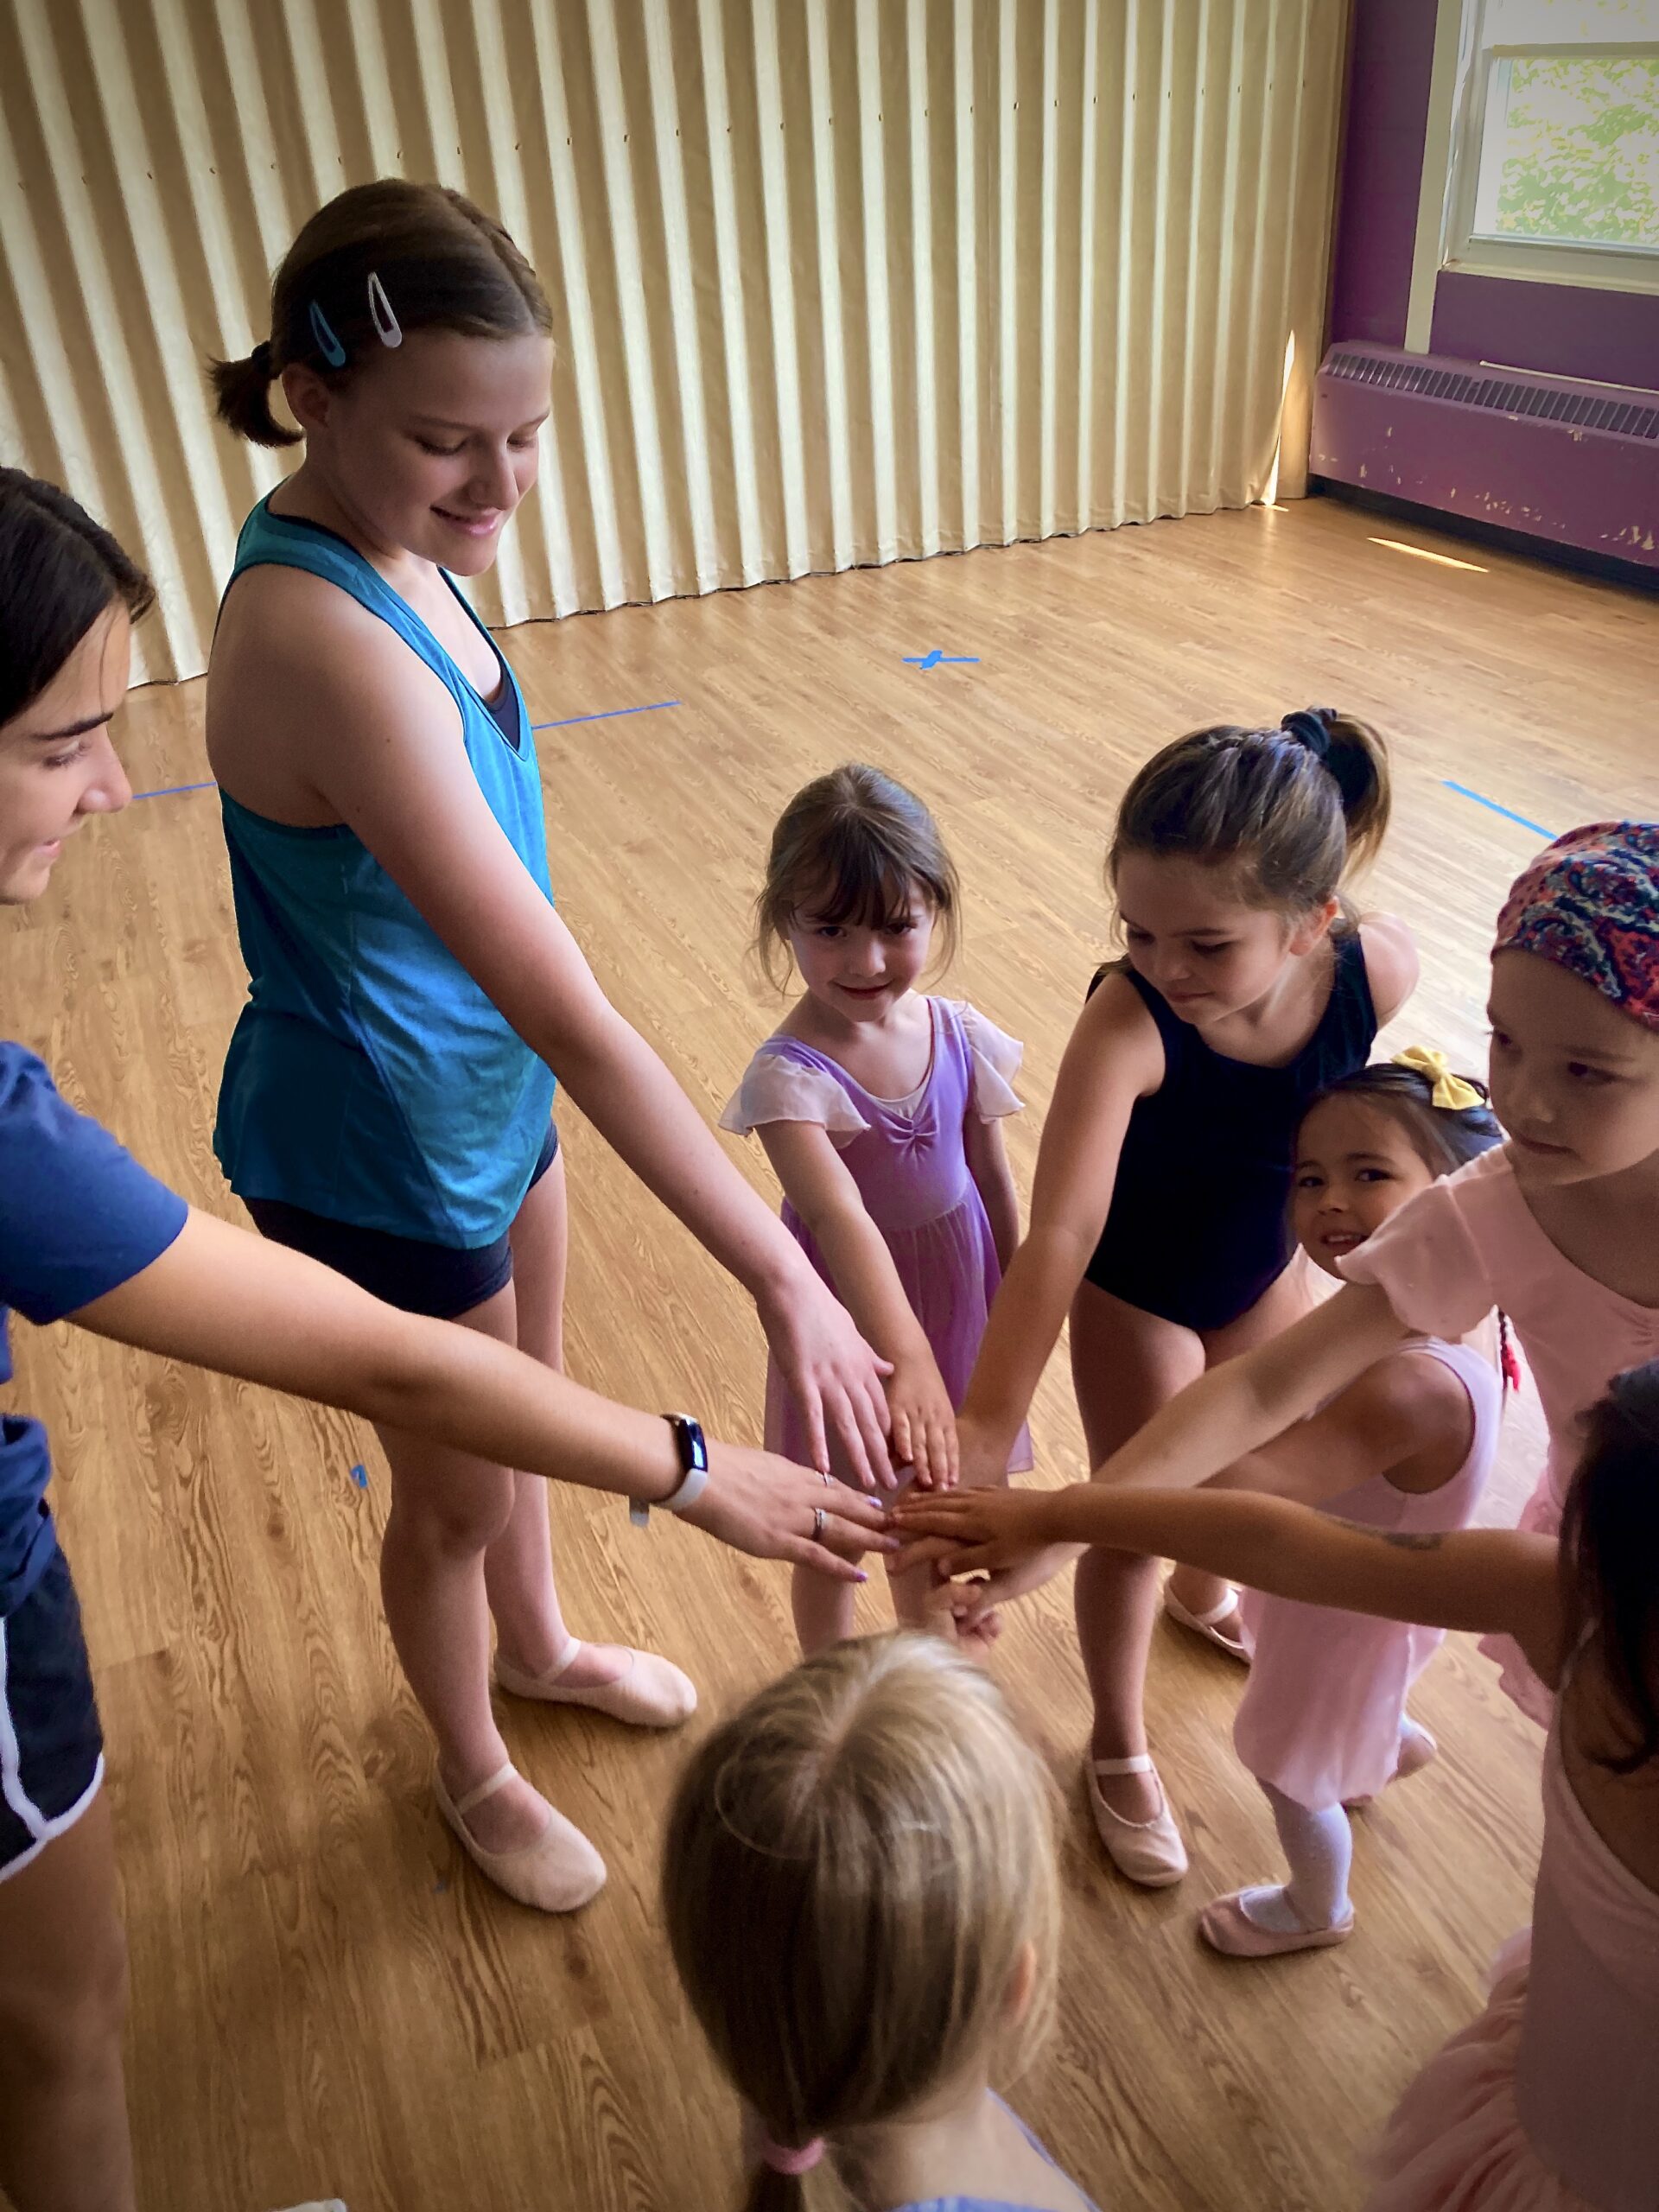 Tuesday- March 7th-3:30 to 5:30-“Waiting for Spring” Dance Workshop ages 3 to 8